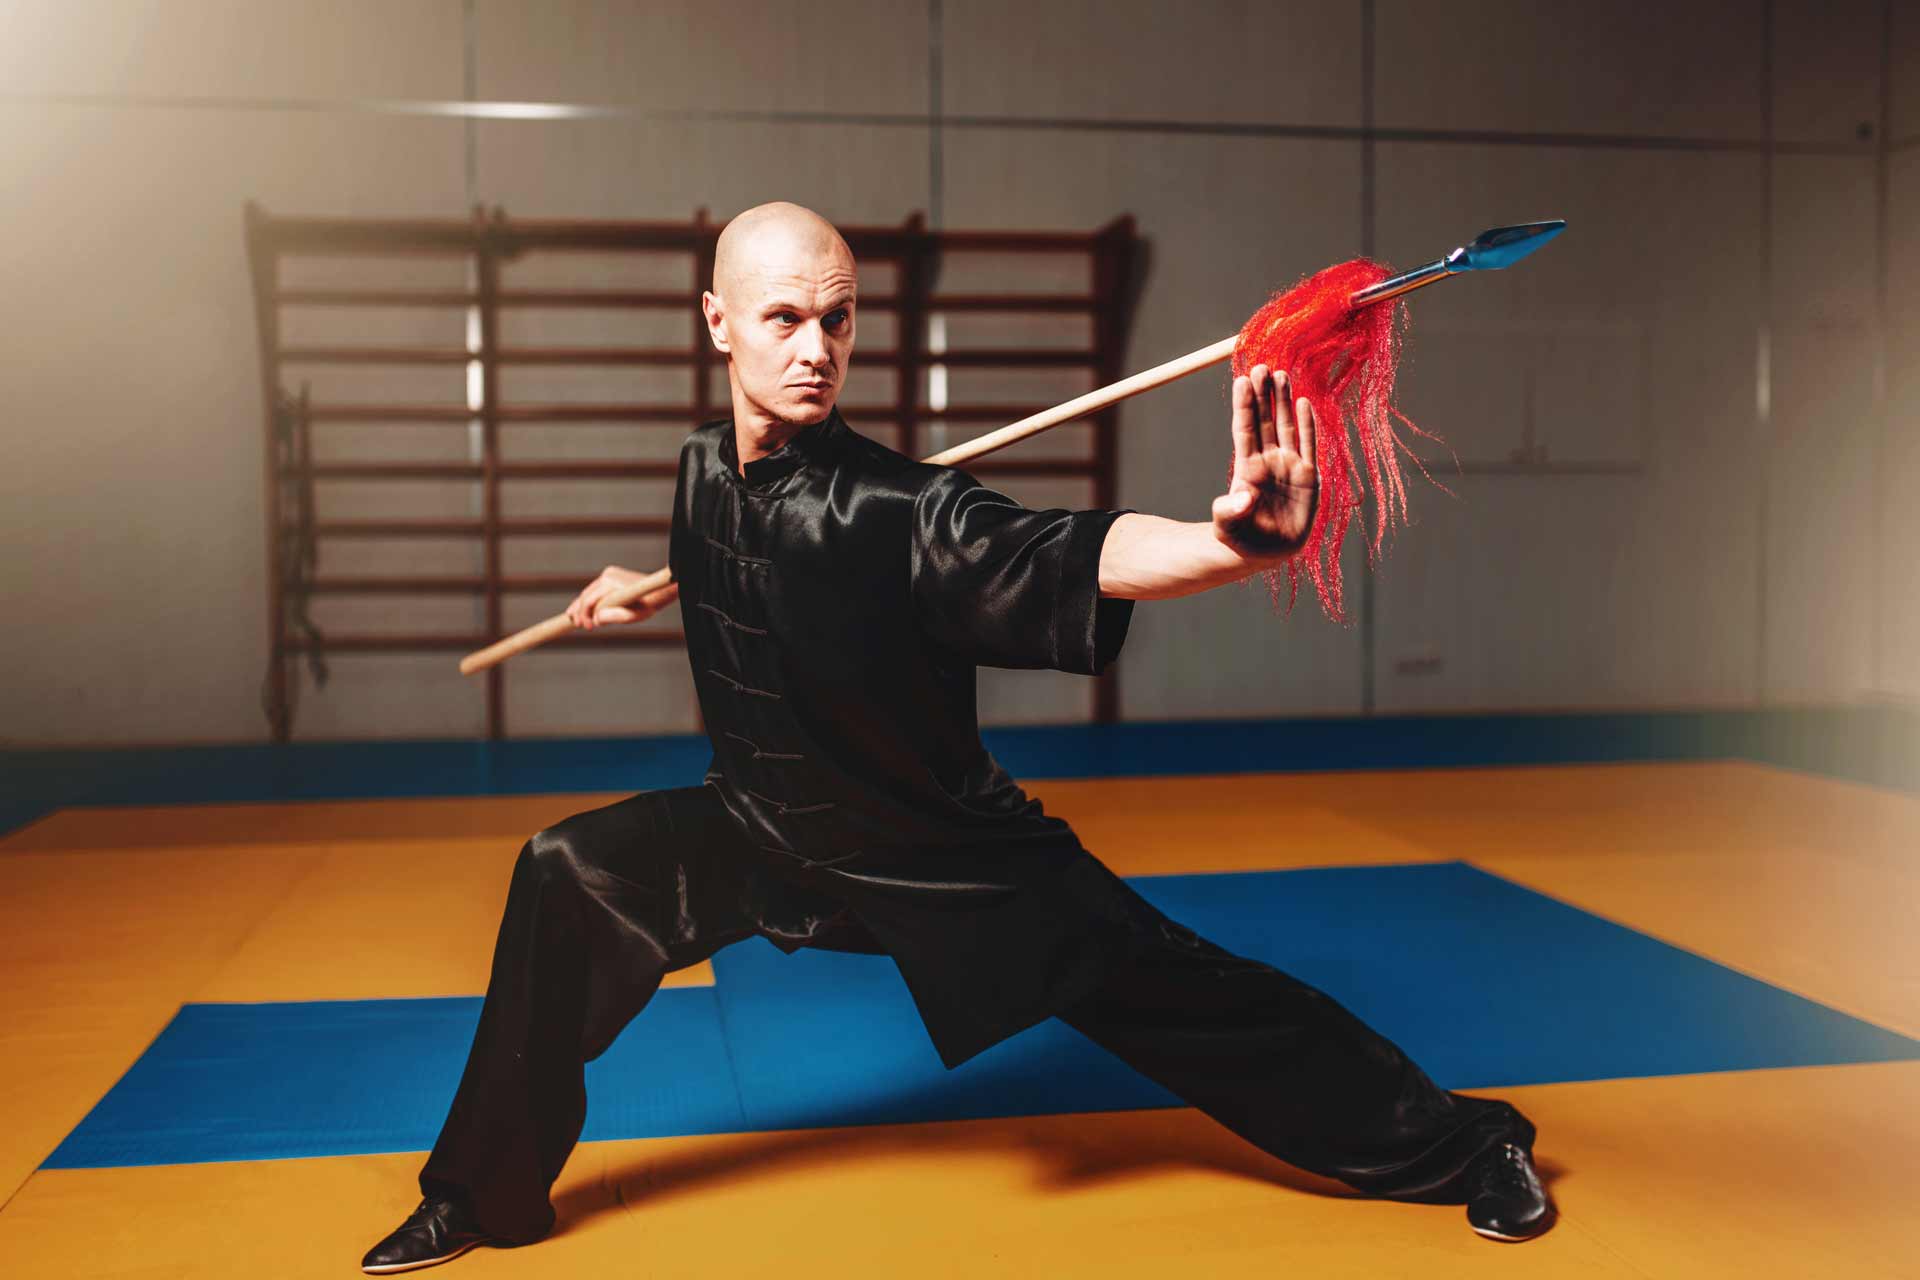 //kungfucoach.in/wp-content/uploads/2018/02/wushu-master-training-with-spear-martial-arts-PQUMG8T.jpg